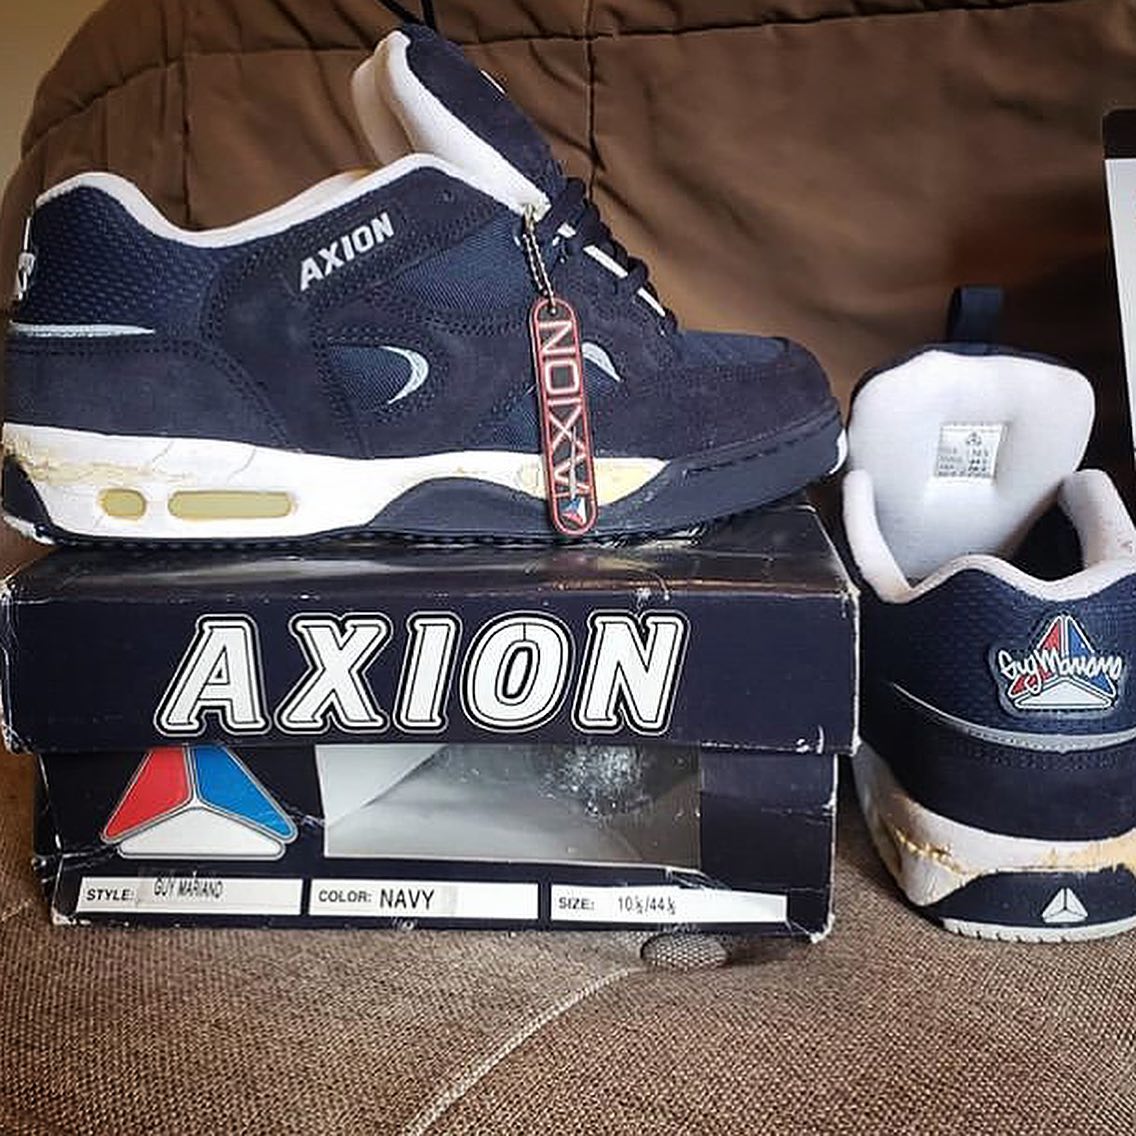 @lukeanthrope keeps breaking out the classics.  This is my favorite Axion shoe ever.  Had the white/yellow in 6th grade.  #sk8shoewars #axion #axionfootwear #guymariano